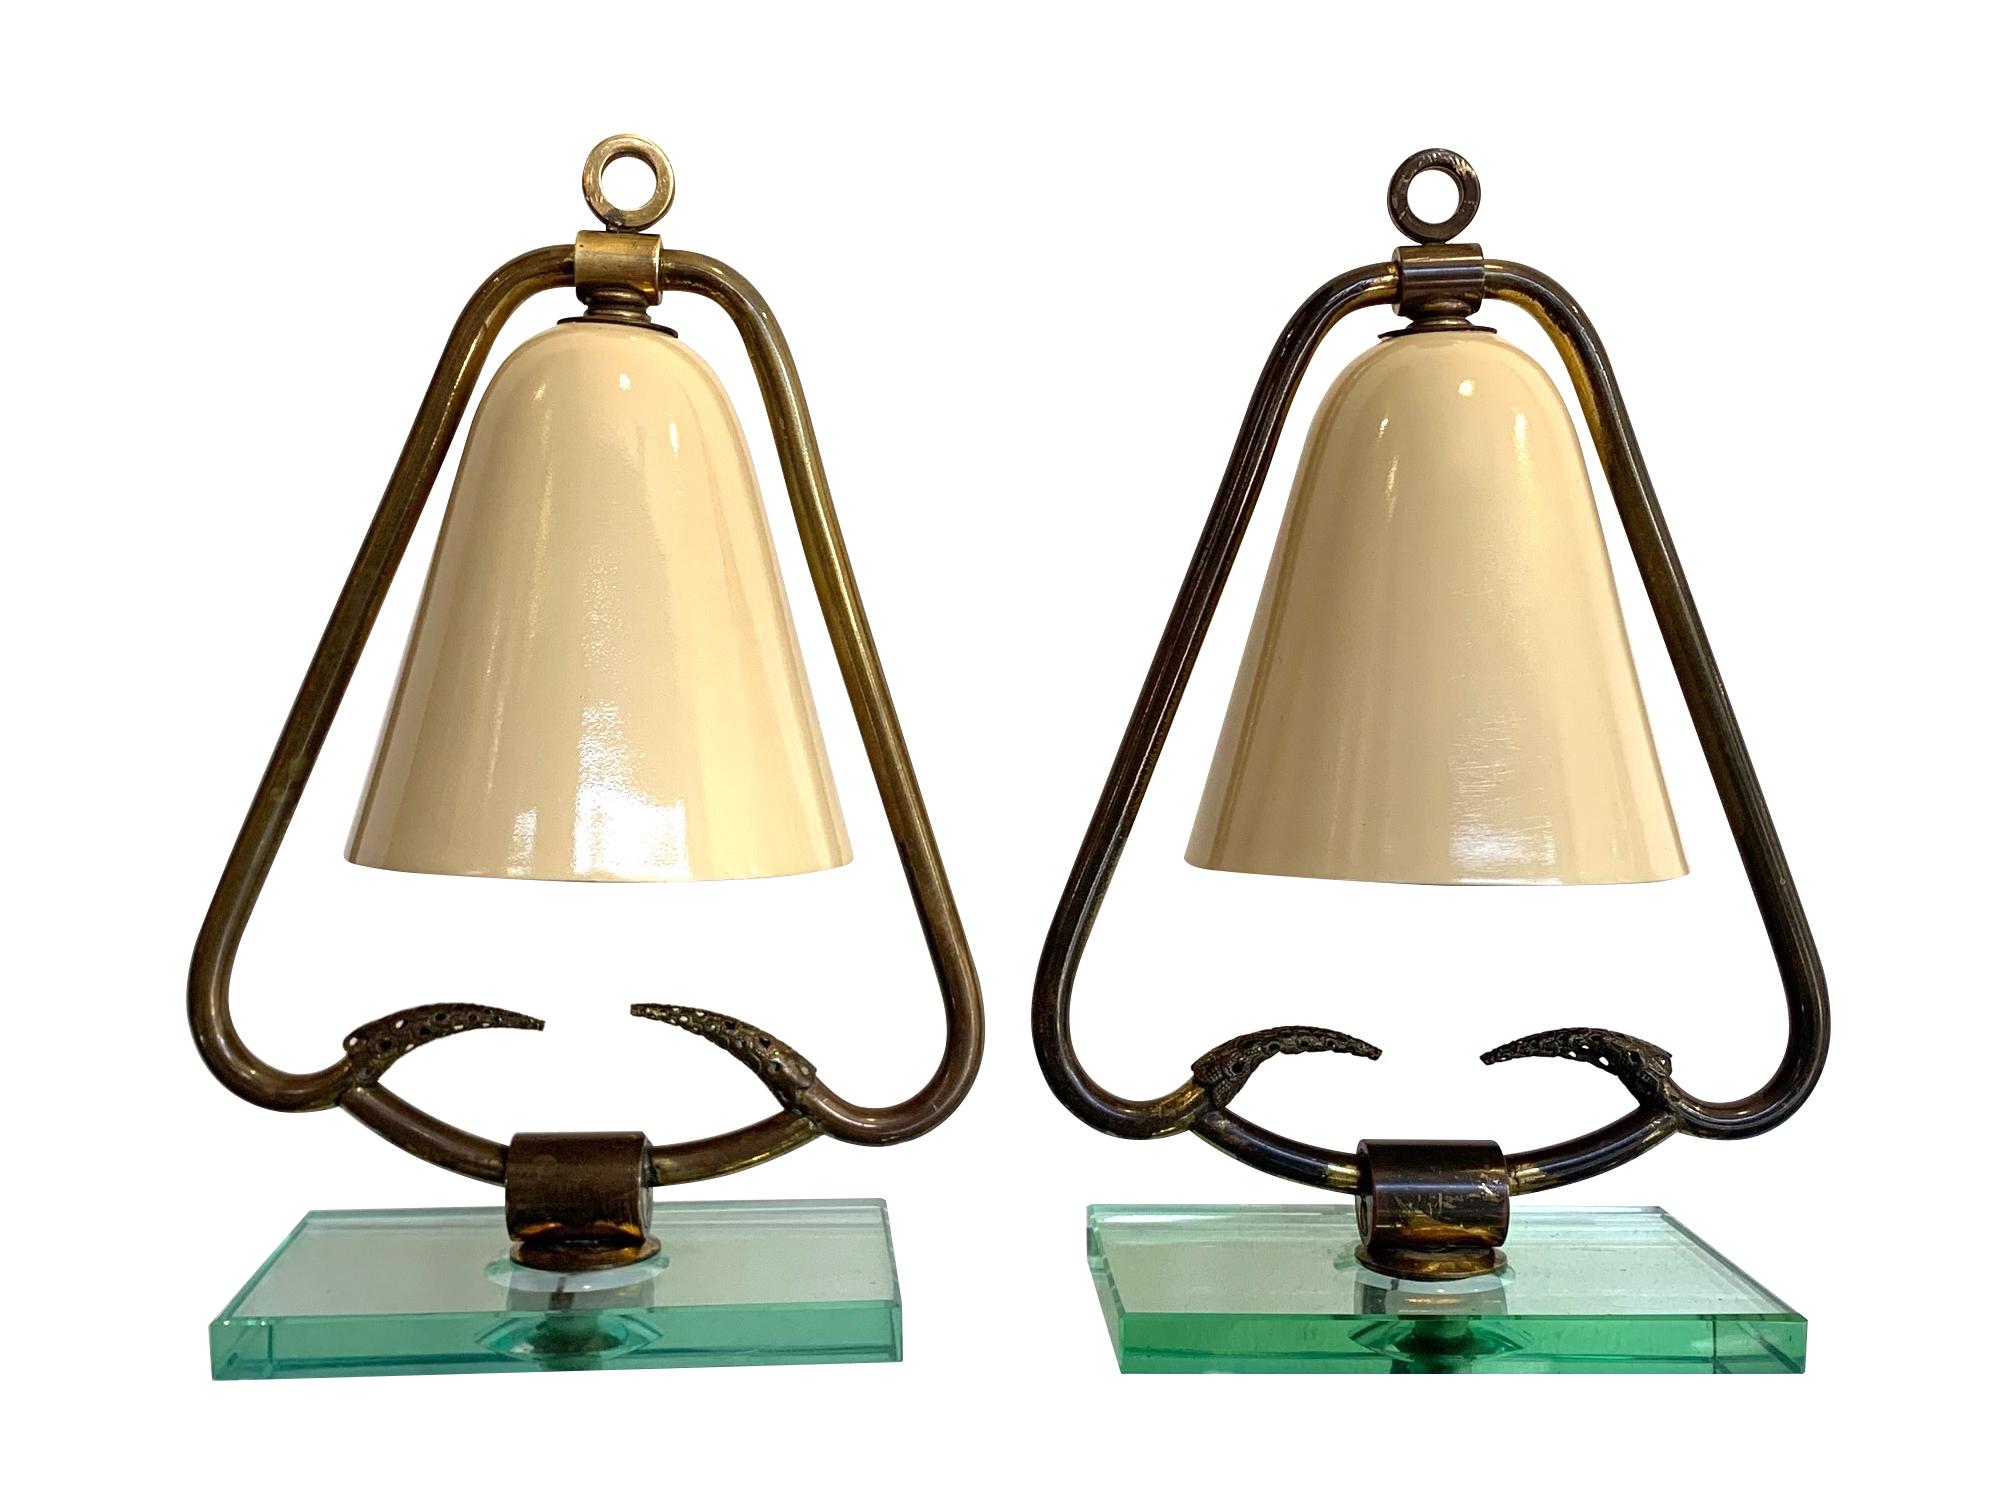 Metal Pair of 1950s Italian Lamps with Enamel Shades on Brass Frame Mounted on Glass